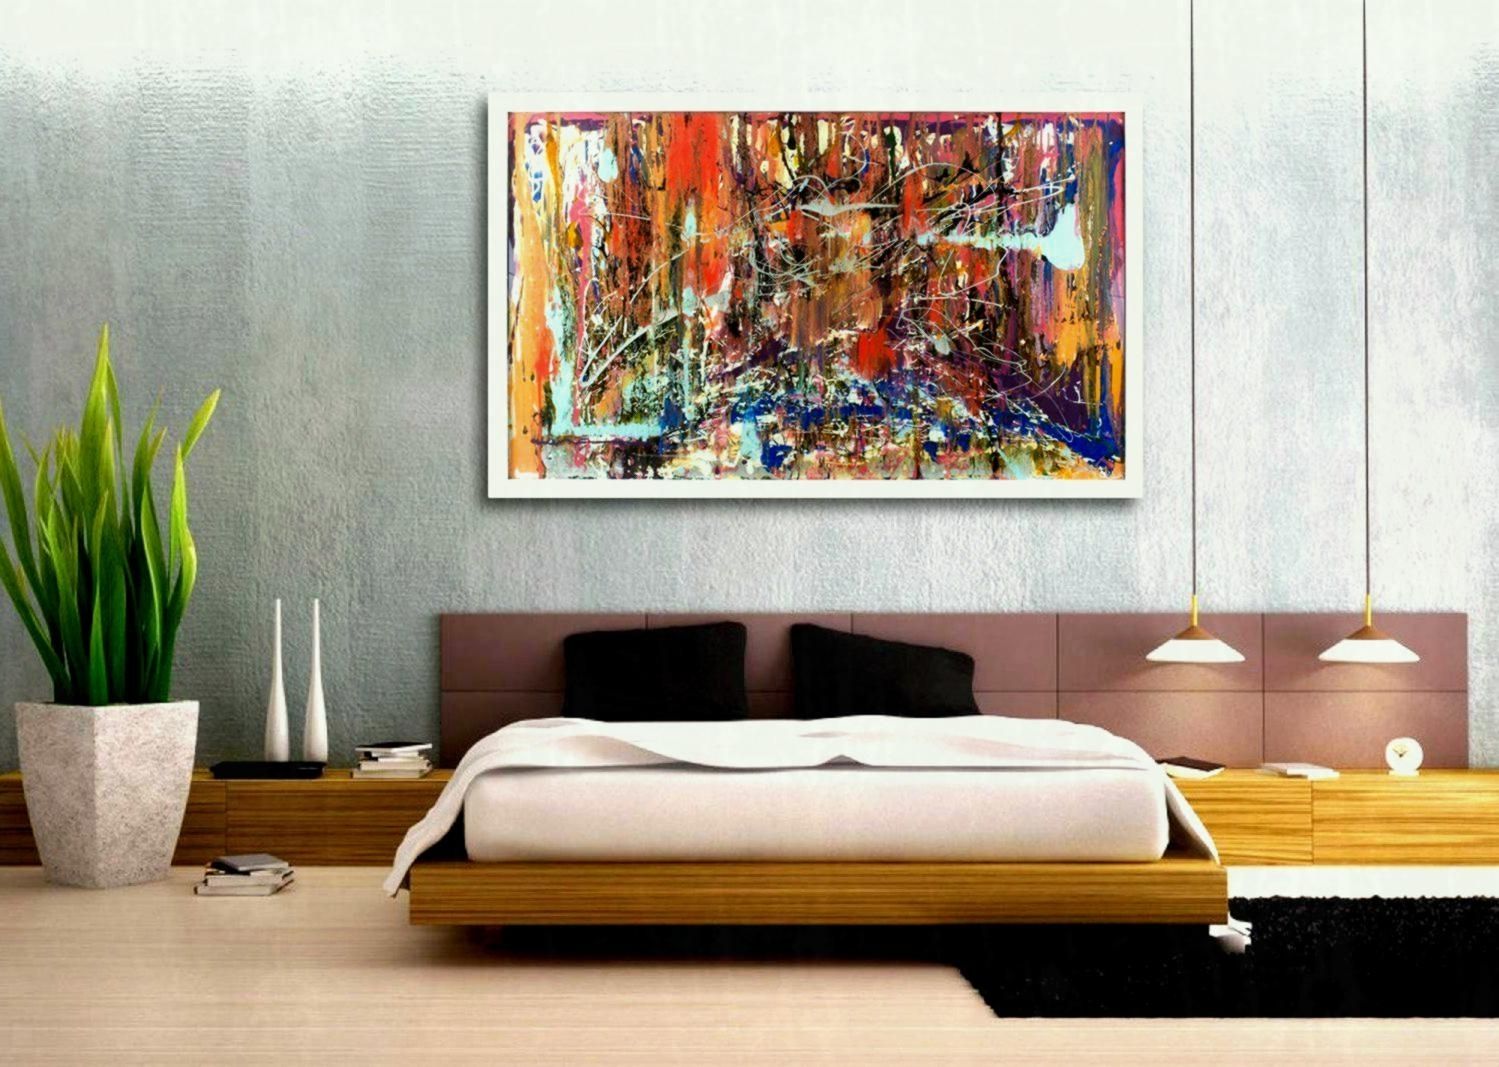 Large Canvas Wall Art Calm Soothing Huge Cheap Piece Living Room Inside Large Canvas Wall Art (View 15 of 20)